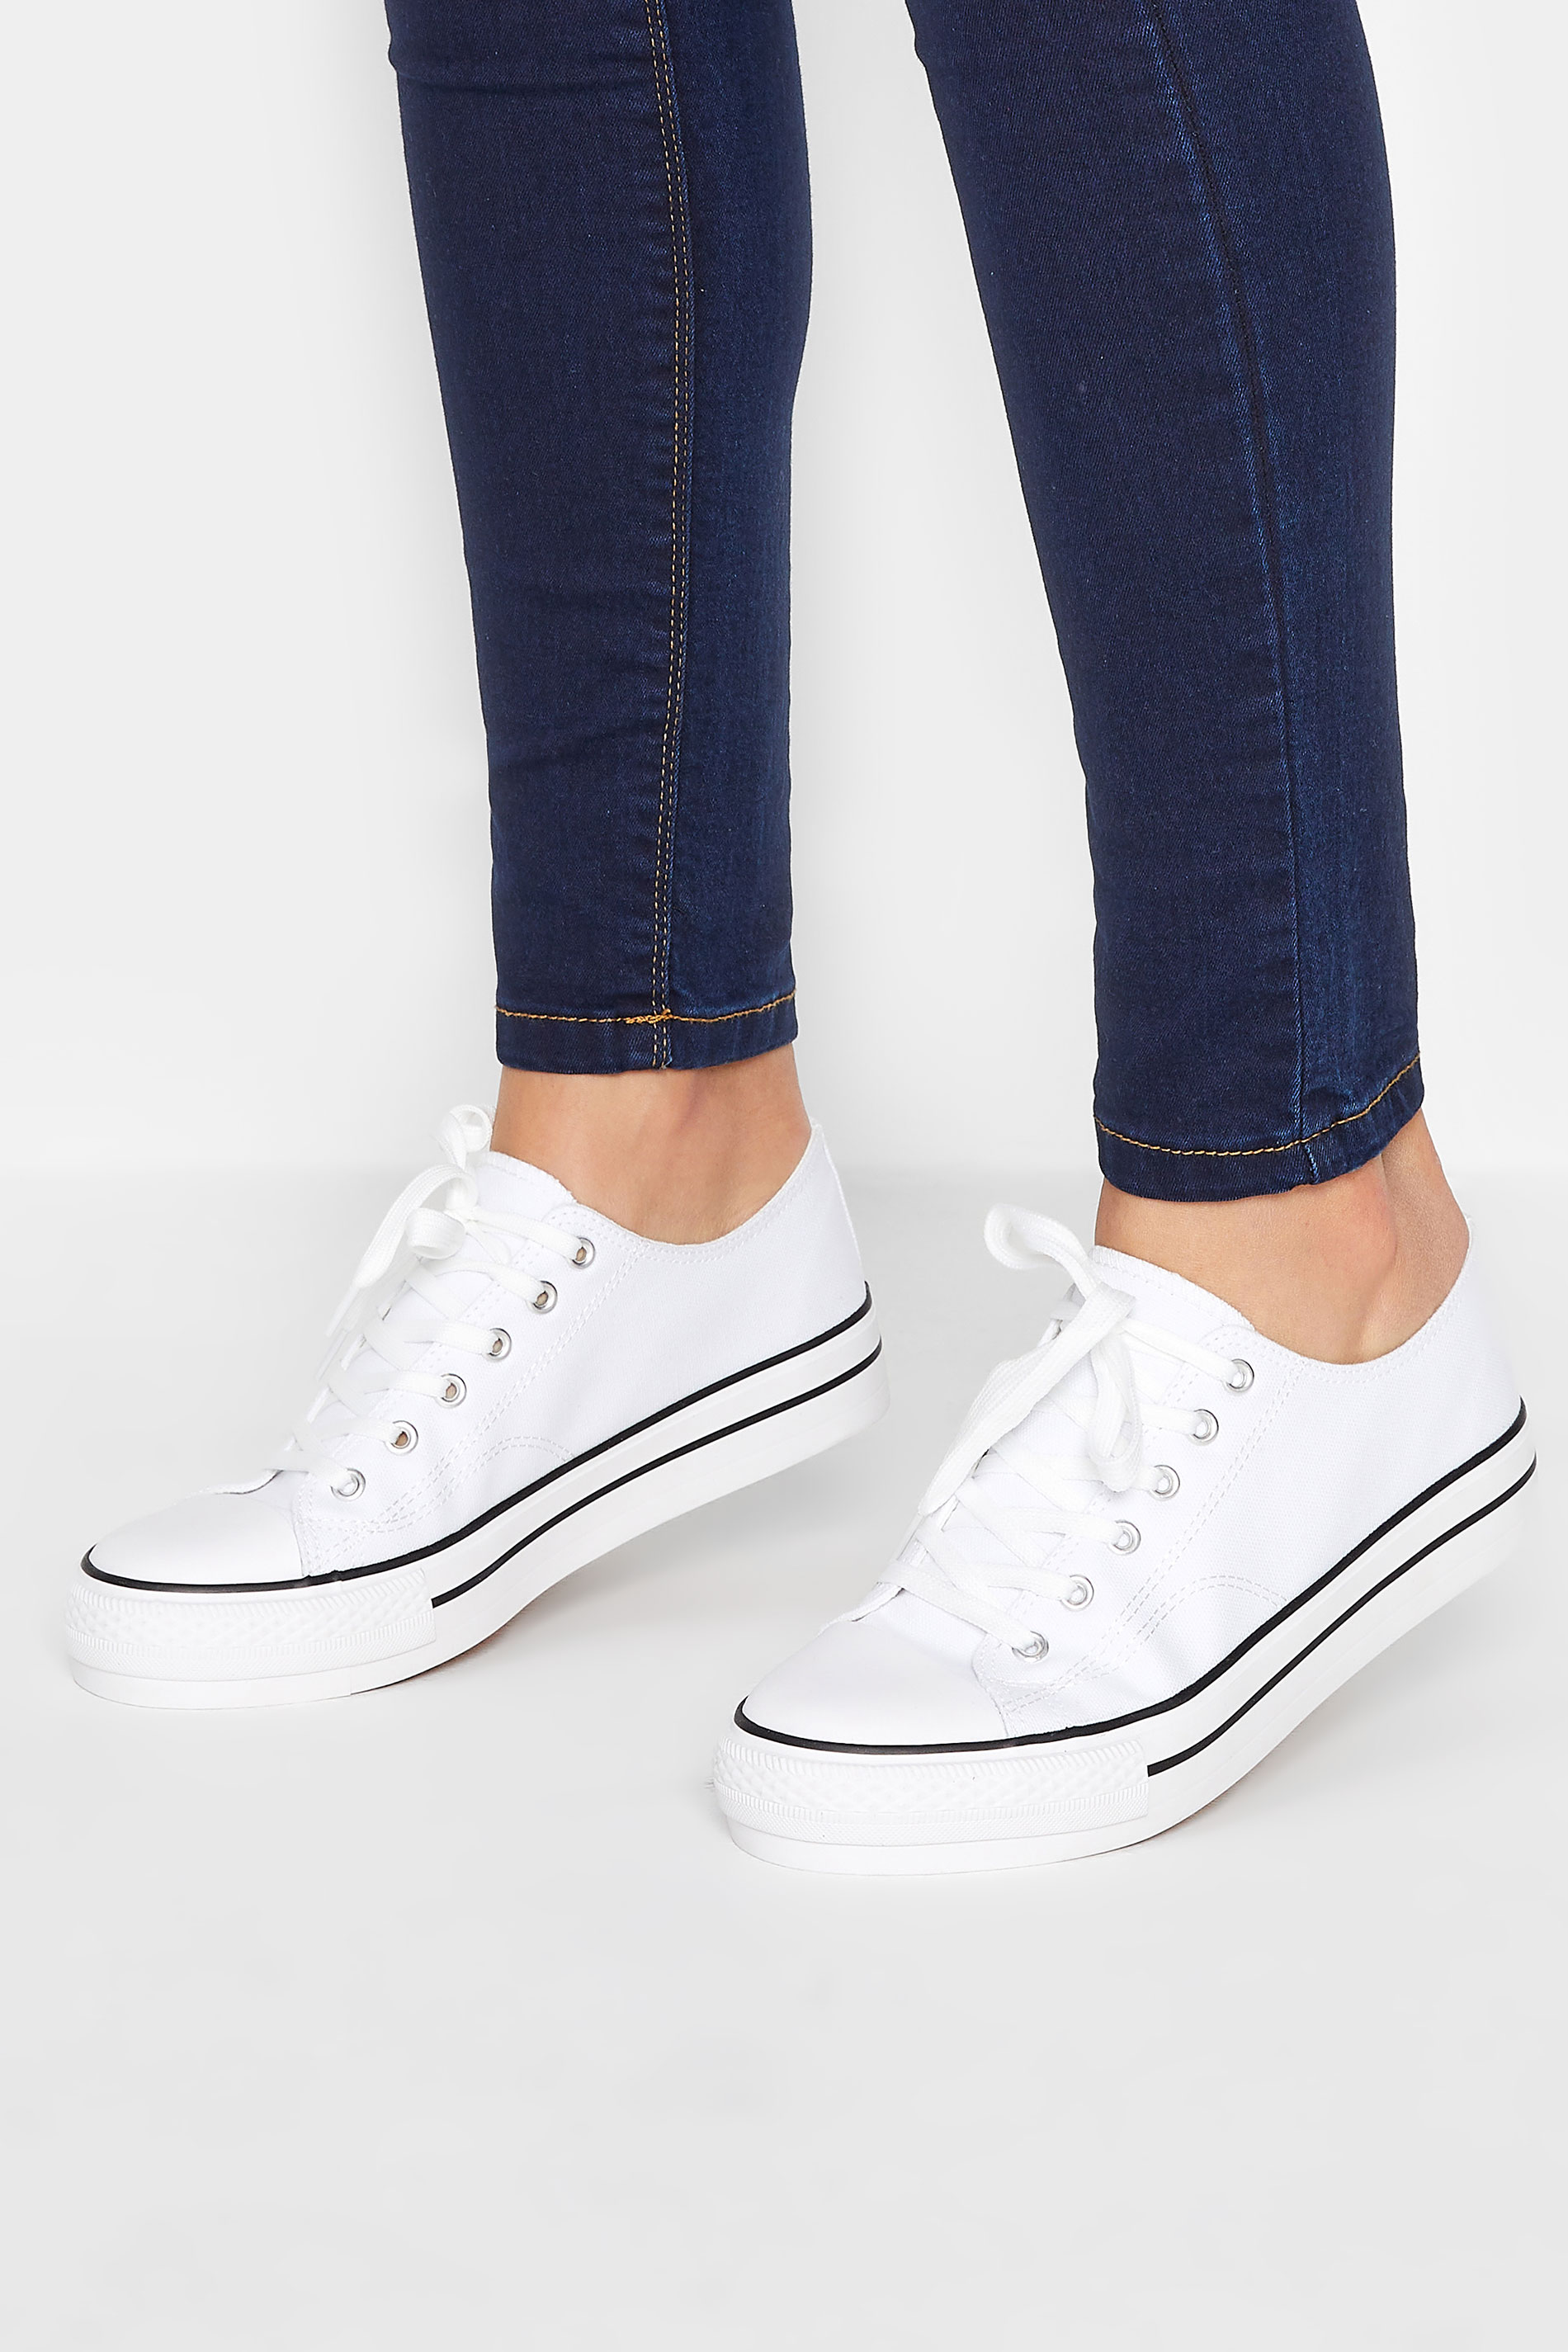 LTS White Platform Canvas Trainers In Standard Fit | Long Tall Sally